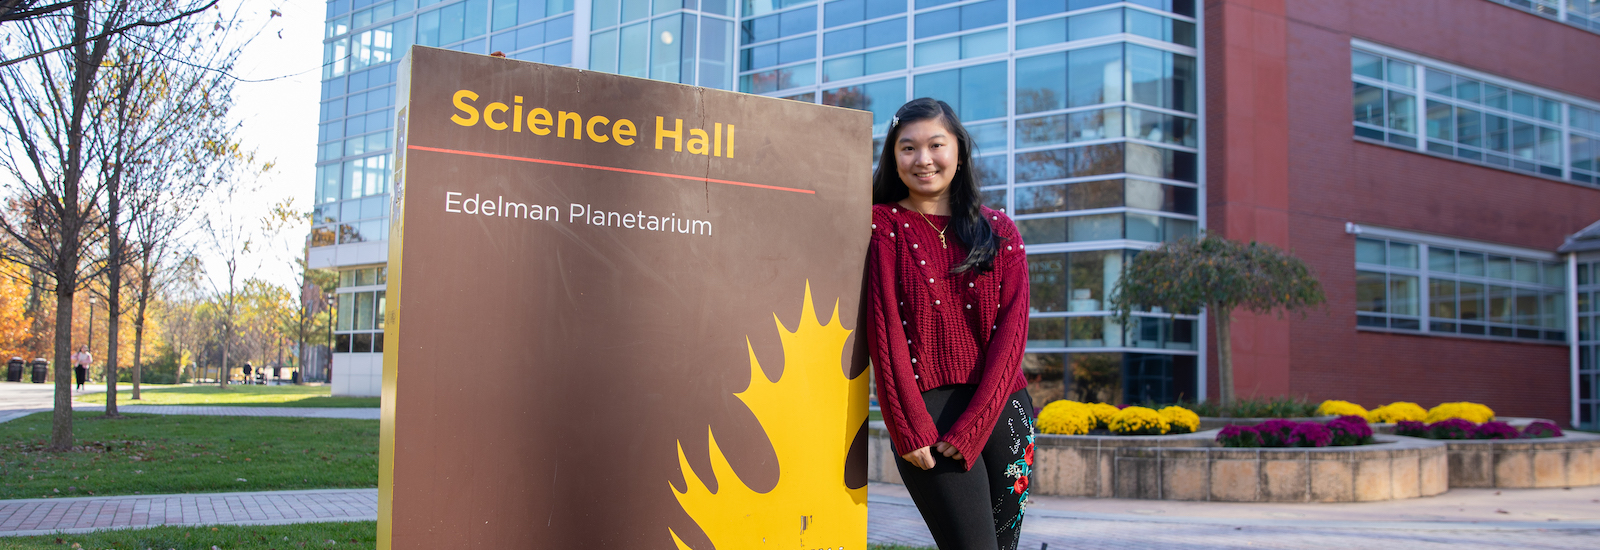 Cindy stands next to the Science Hall sign.